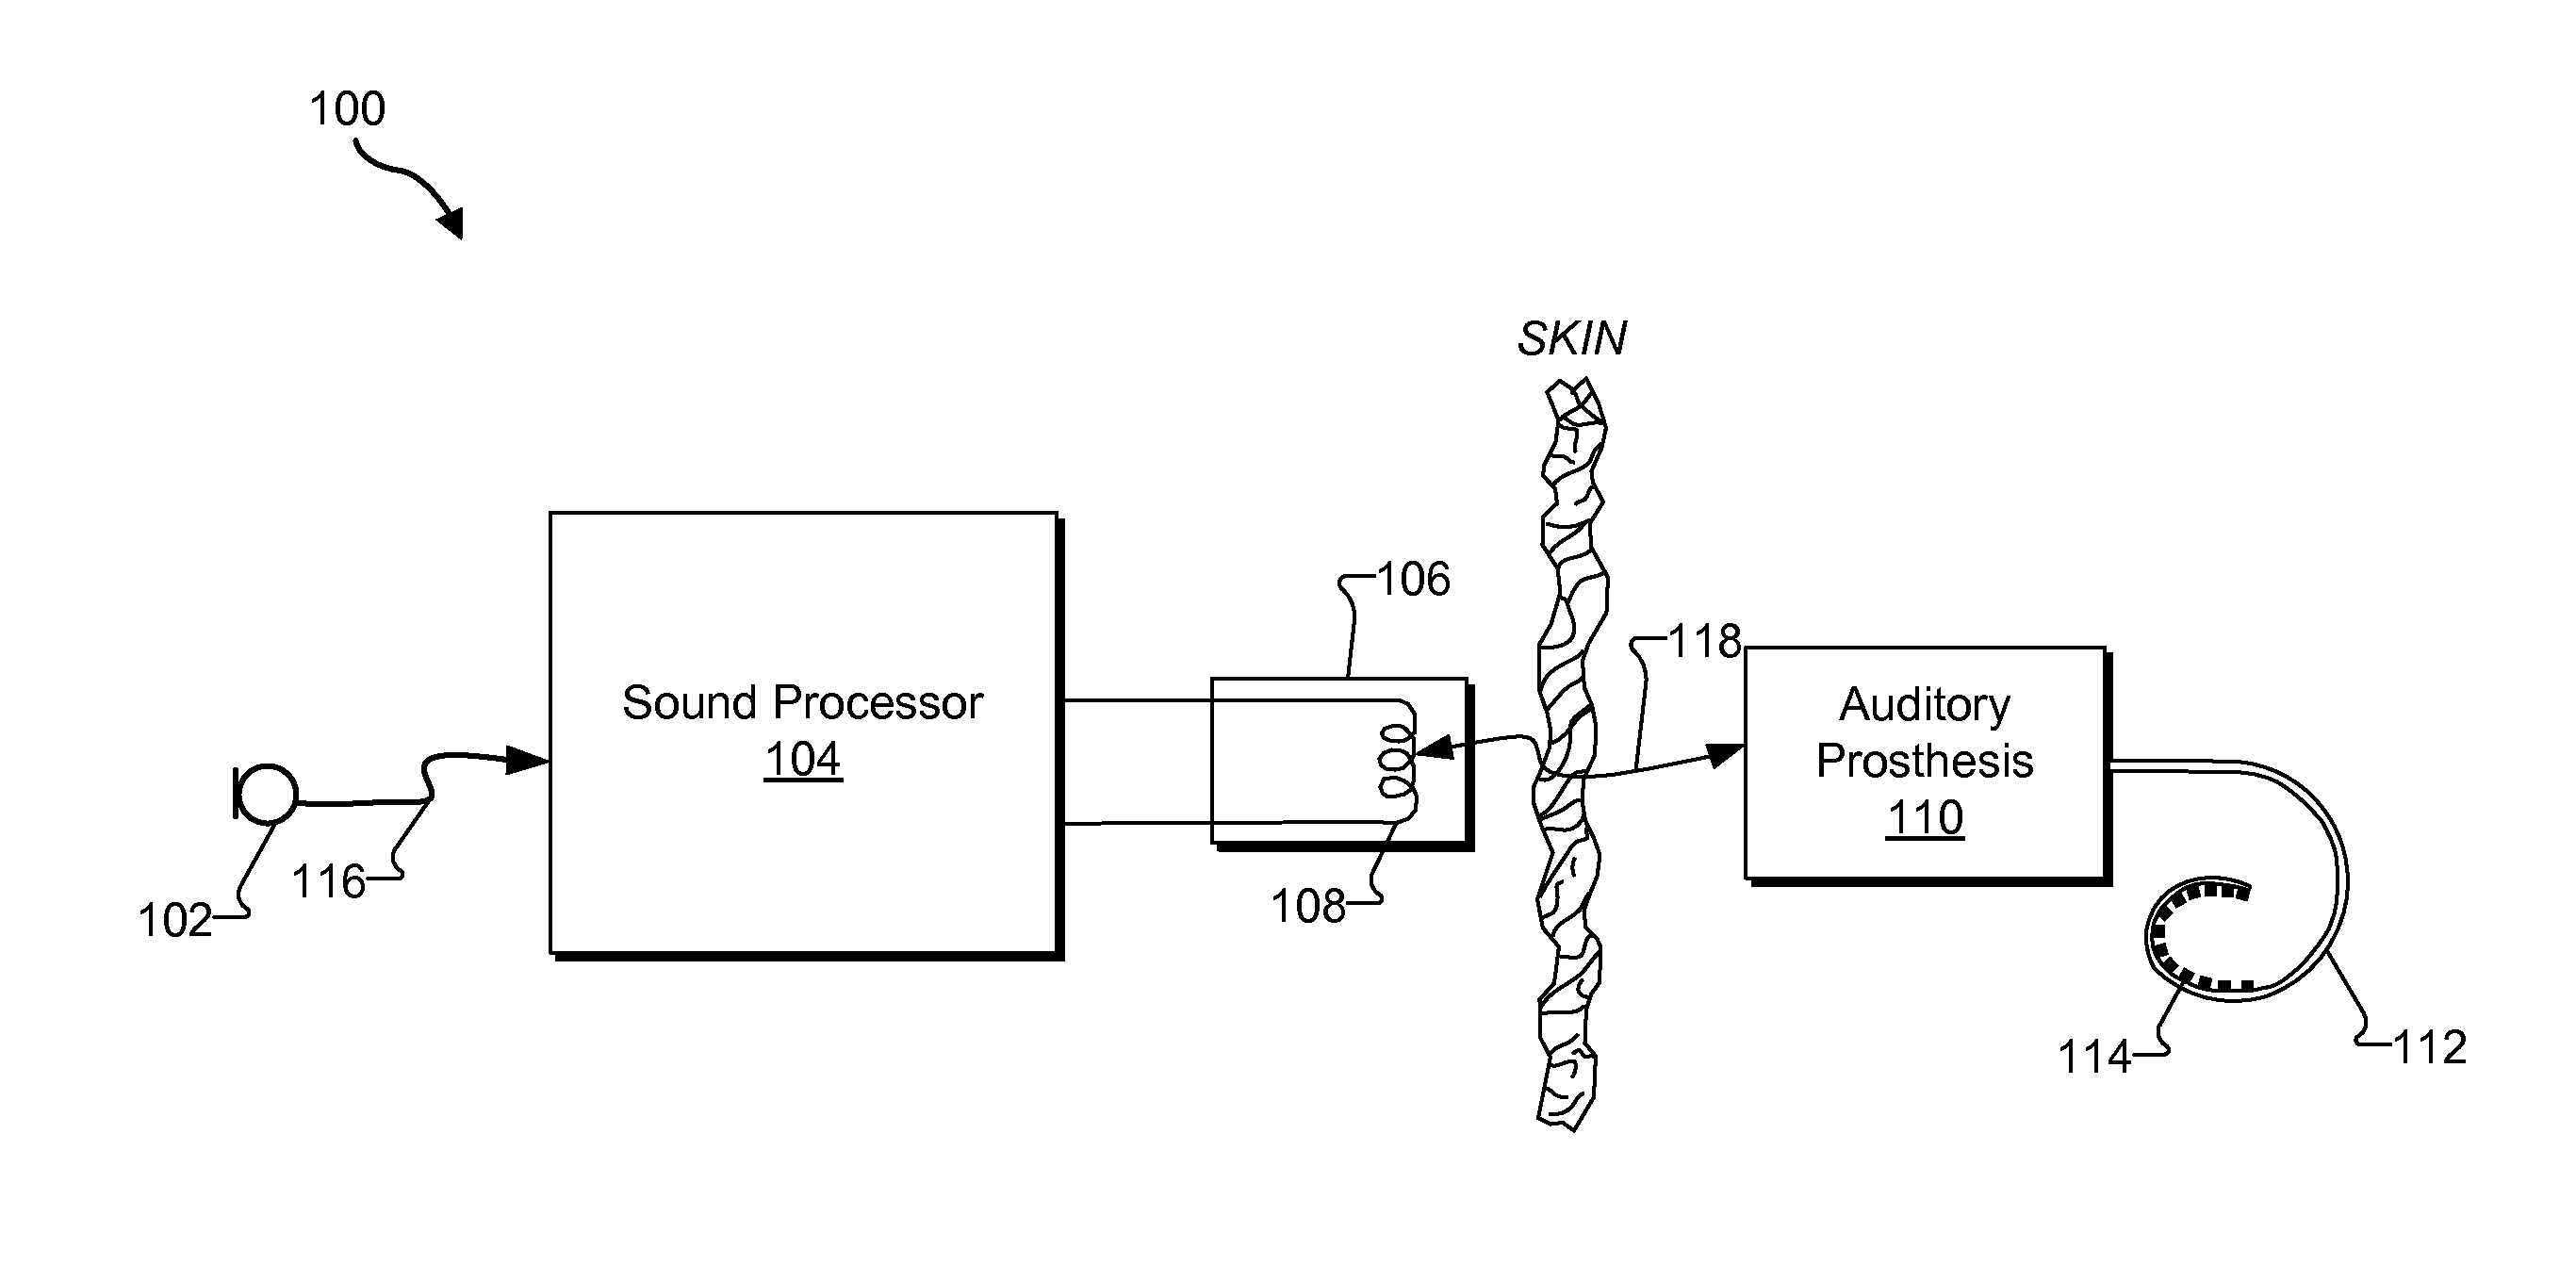 Systems and methods for improving representation by an auditory prosthesis system of audio signals having intermediate sound levels